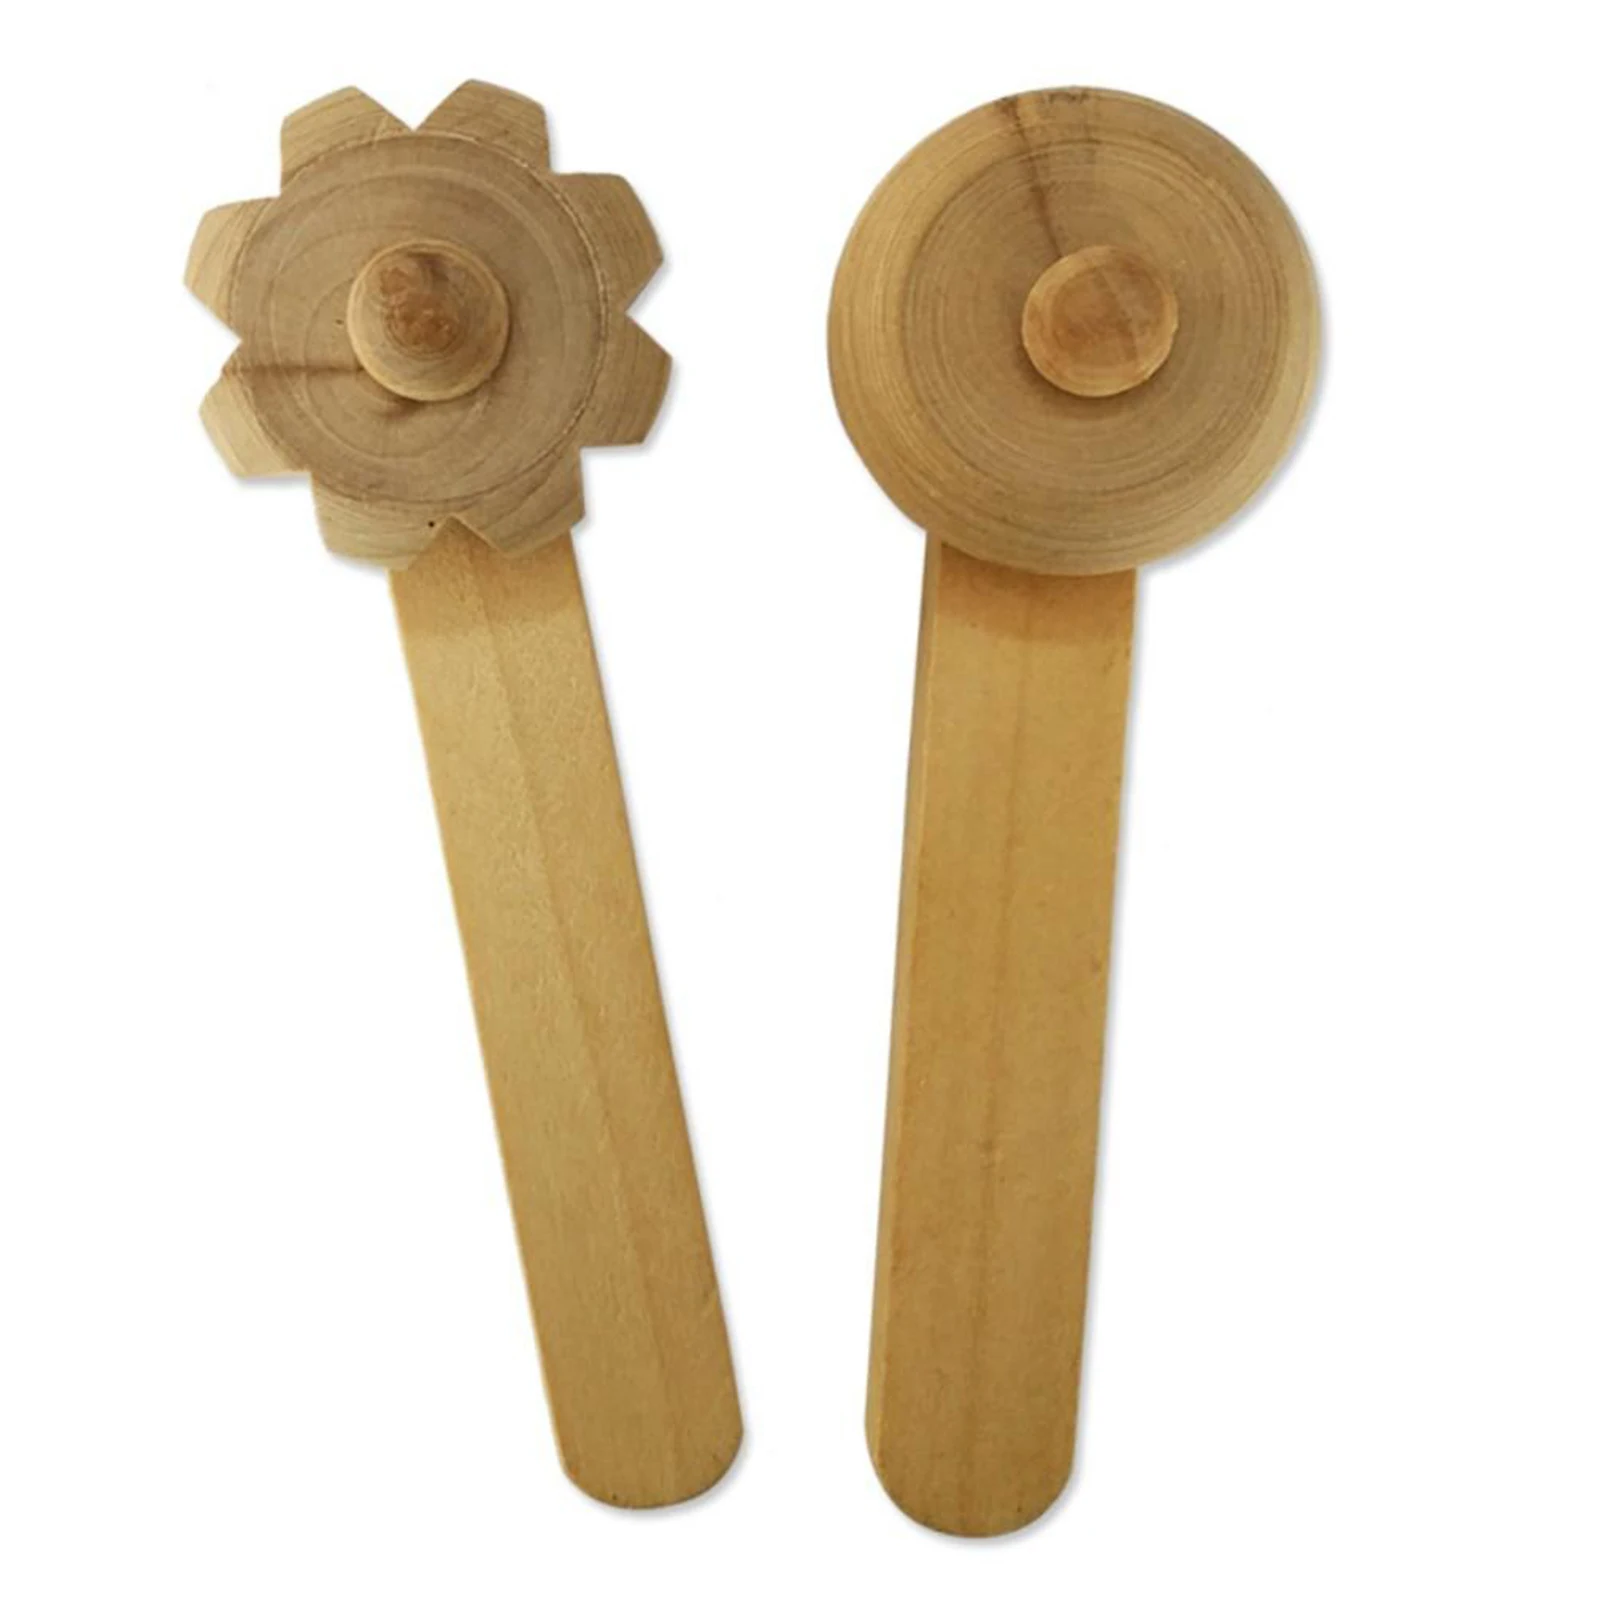 Art Wooden Clay Pasta Tools Toy Biscuit DIY Baking Accessories Age 3-6 Years Old